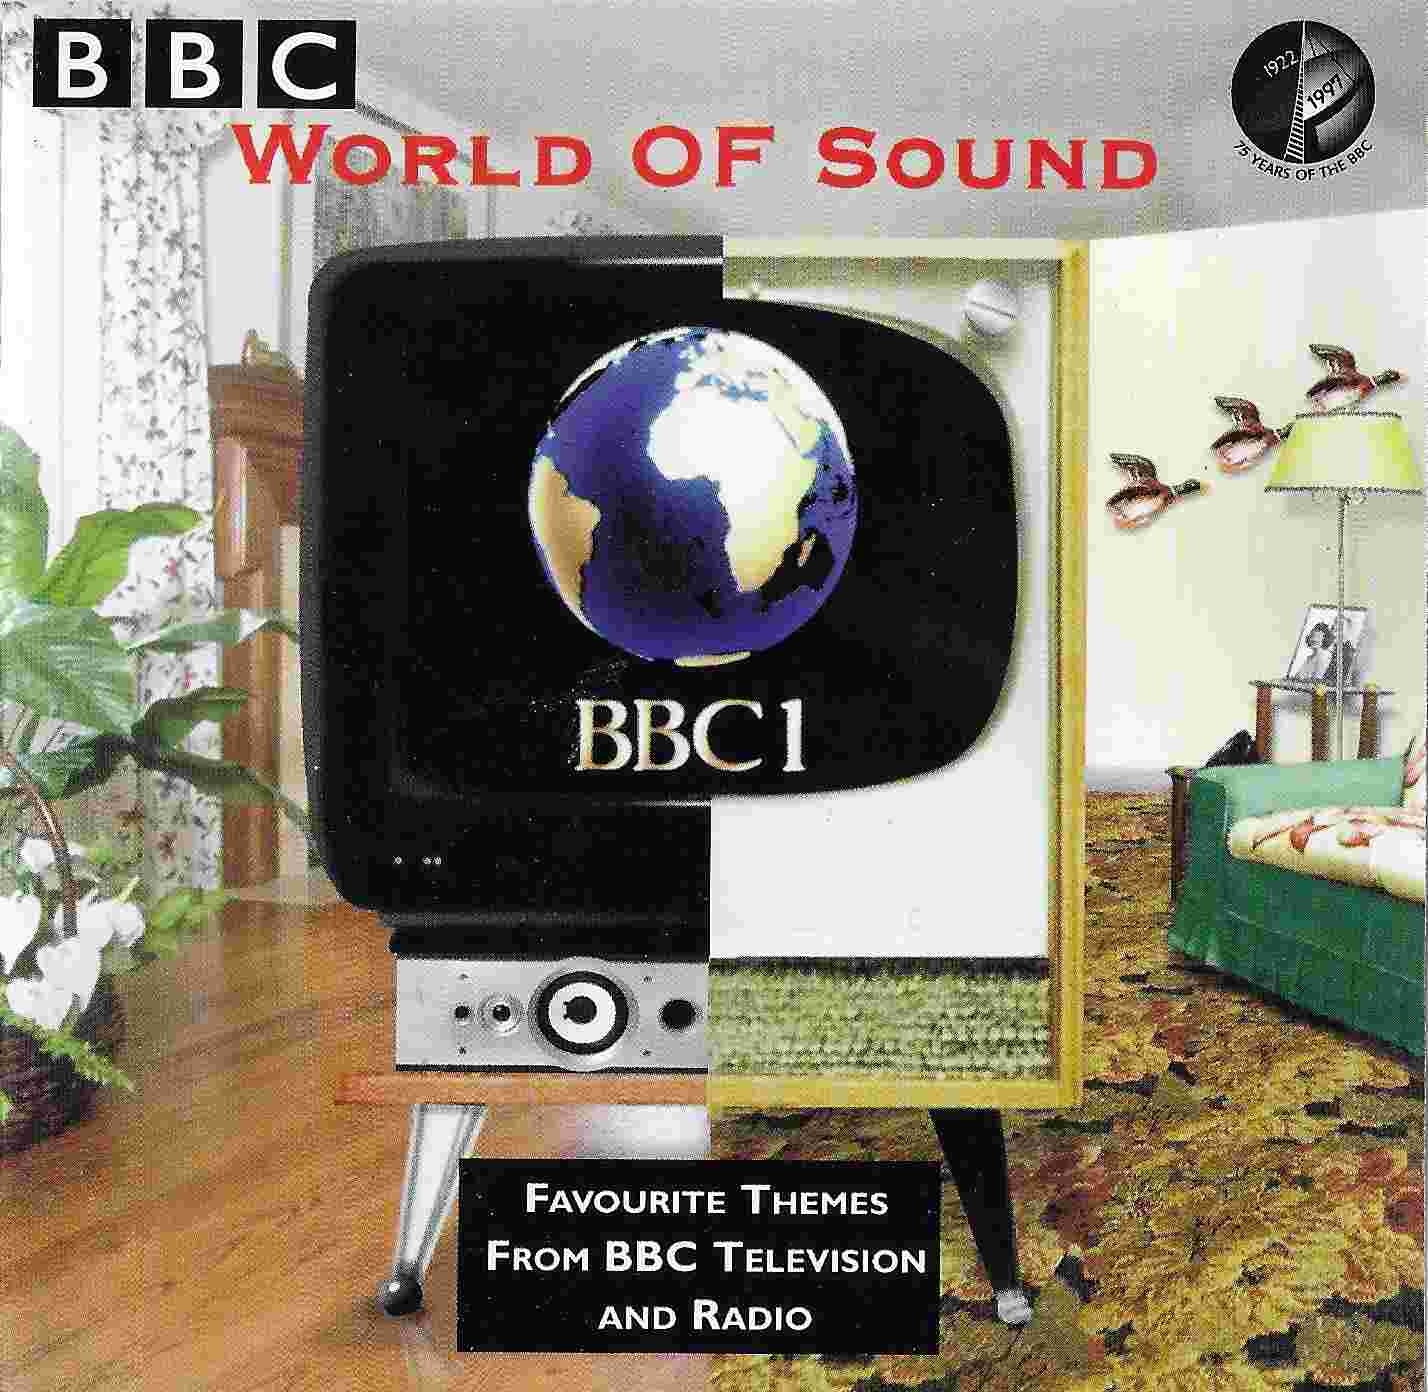 Picture of World of sound - Favourite themes from BBC television and radio by artist Various from the BBC cds - Records and Tapes library